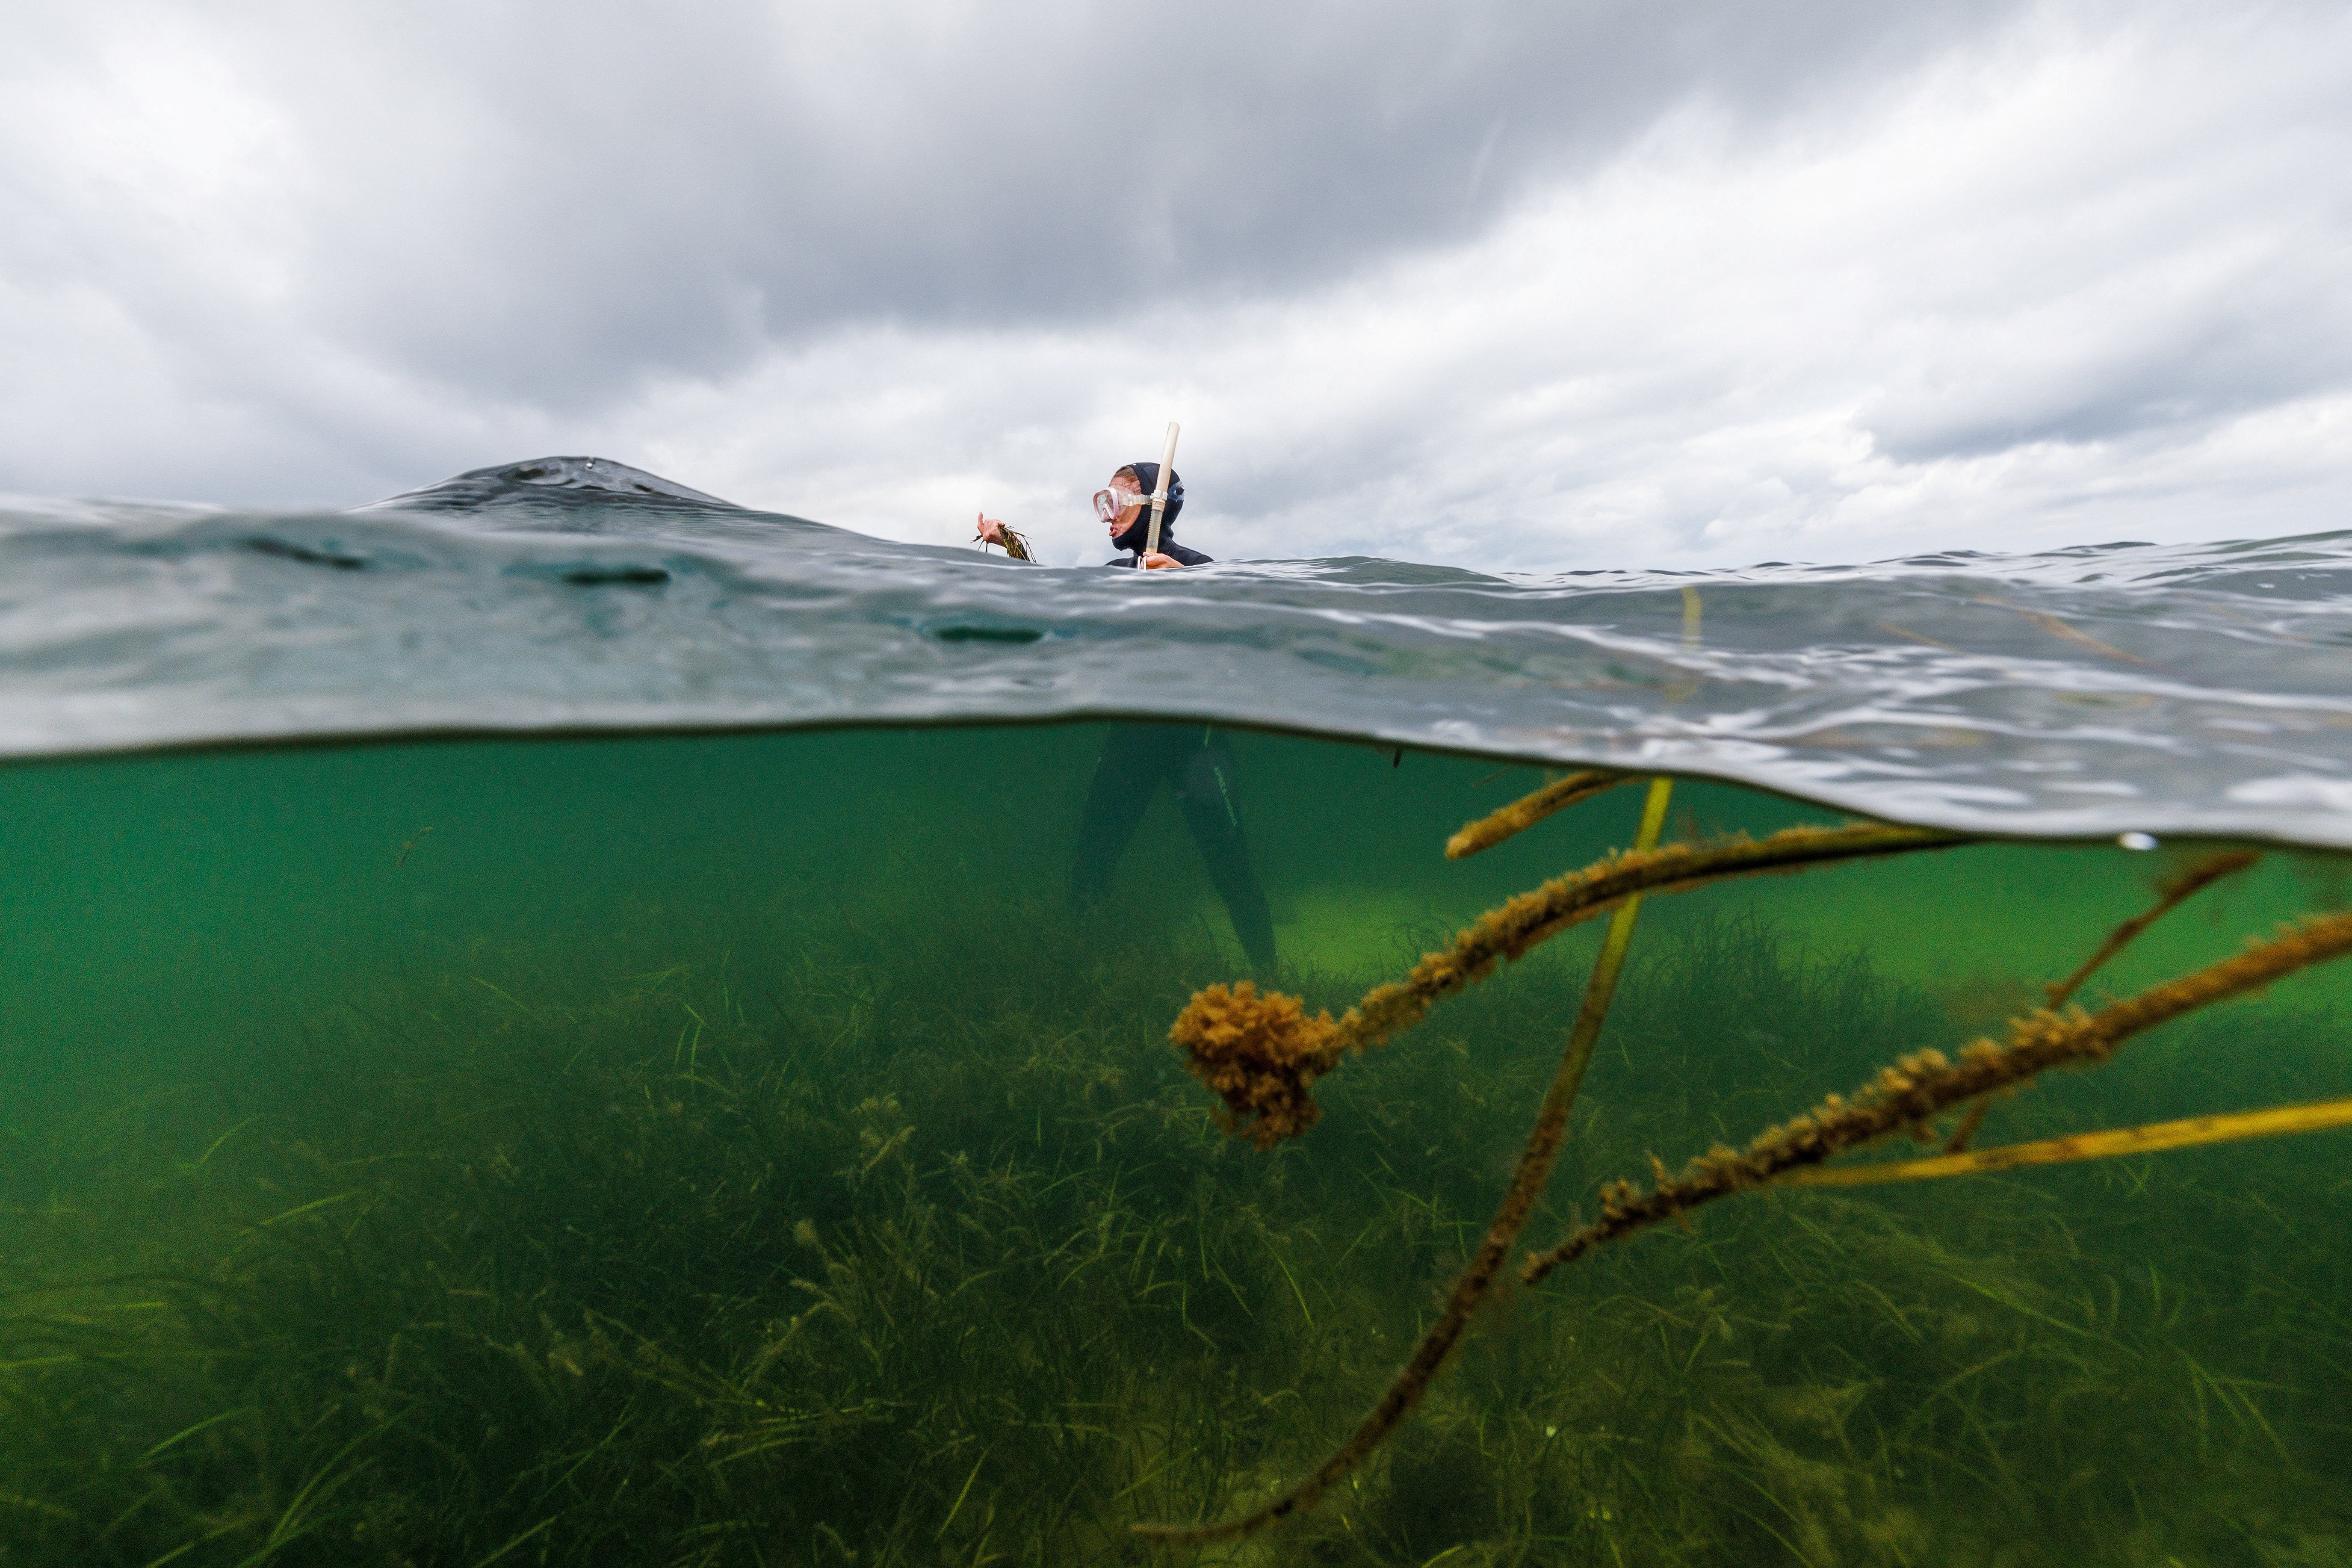 Angela Stevenson, 39, a marine scientist for Geomar, stands in a seagrass meadow while collecting flowering seagrass, in Laboe, Germany, 10 July